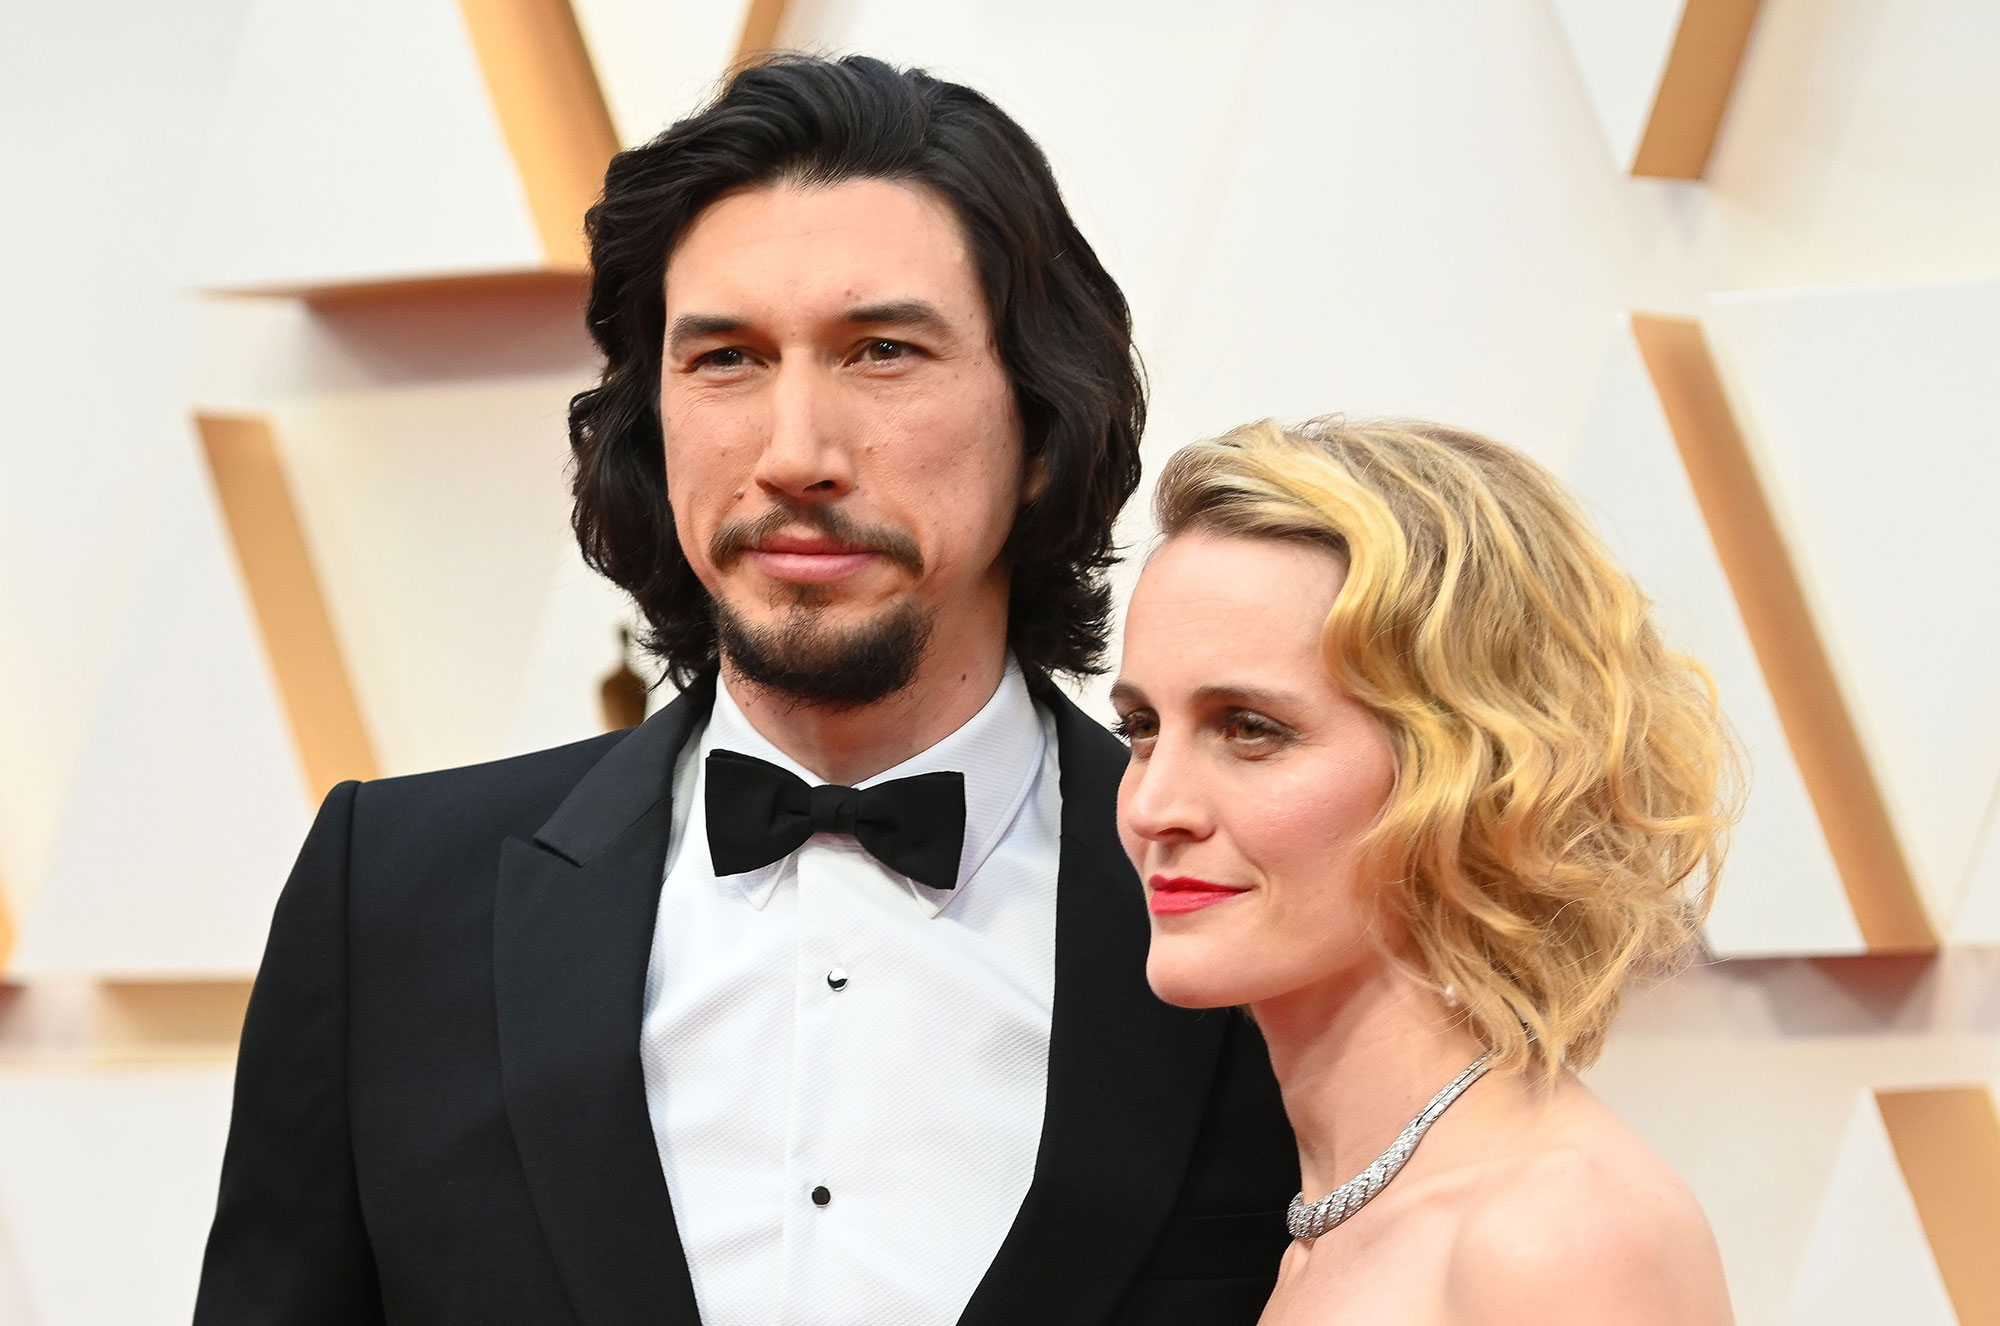 https://www.usmagazine.com/wp-content/uploads/2024/01/Adam-Driver-Says-Son-6-Is-Protective-Over-His-and-Wife-Joanne-Tuckers-8-Month-Old-Daughter.jpg?quality=86&strip=all